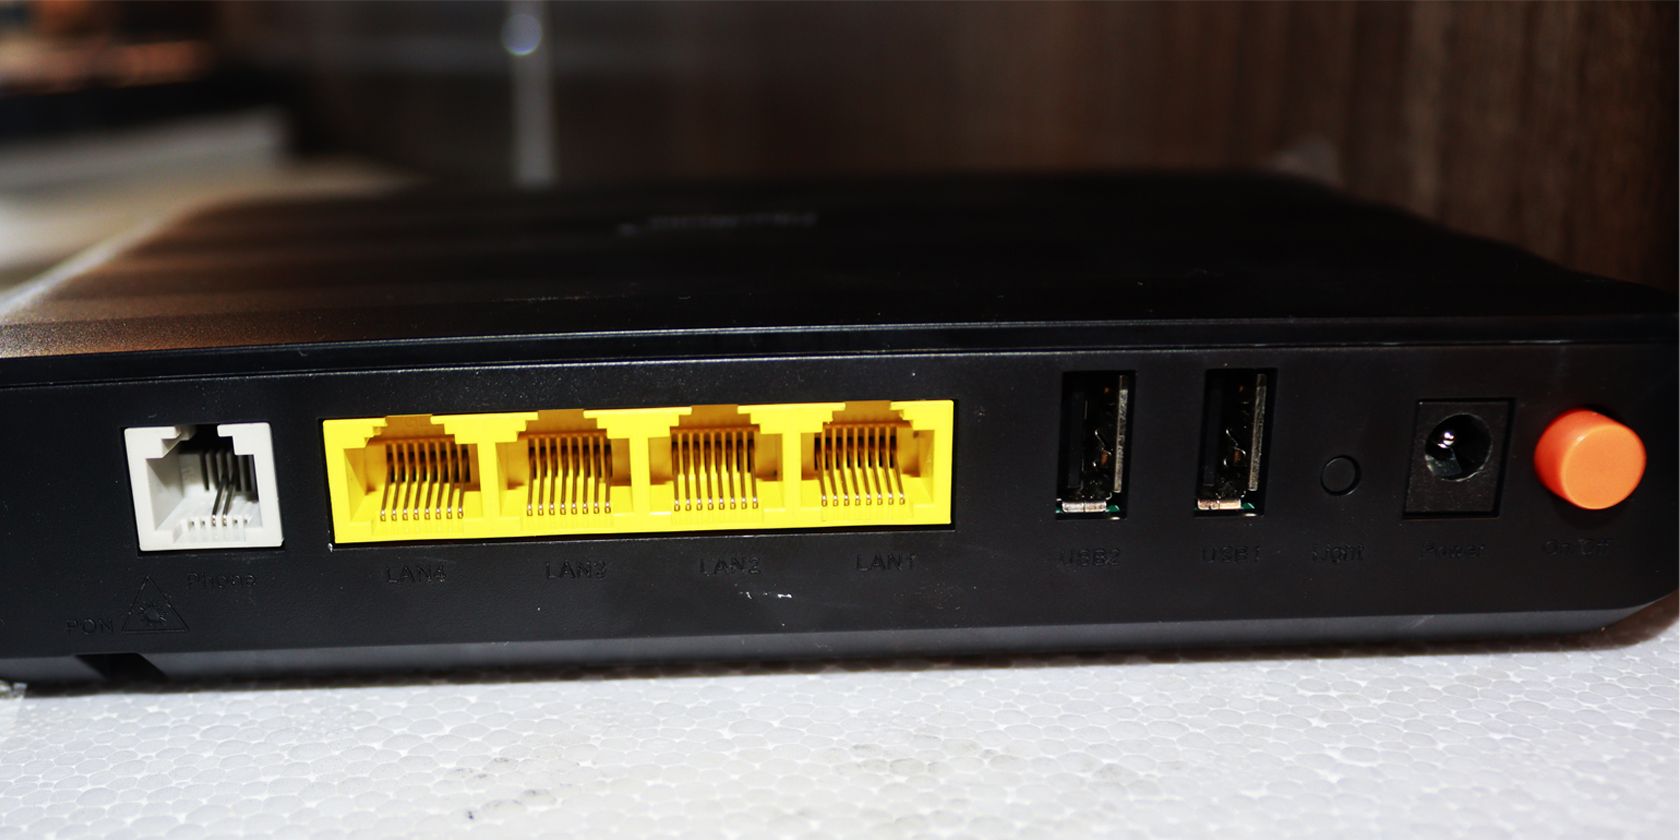 The rear of a black router showing the ports